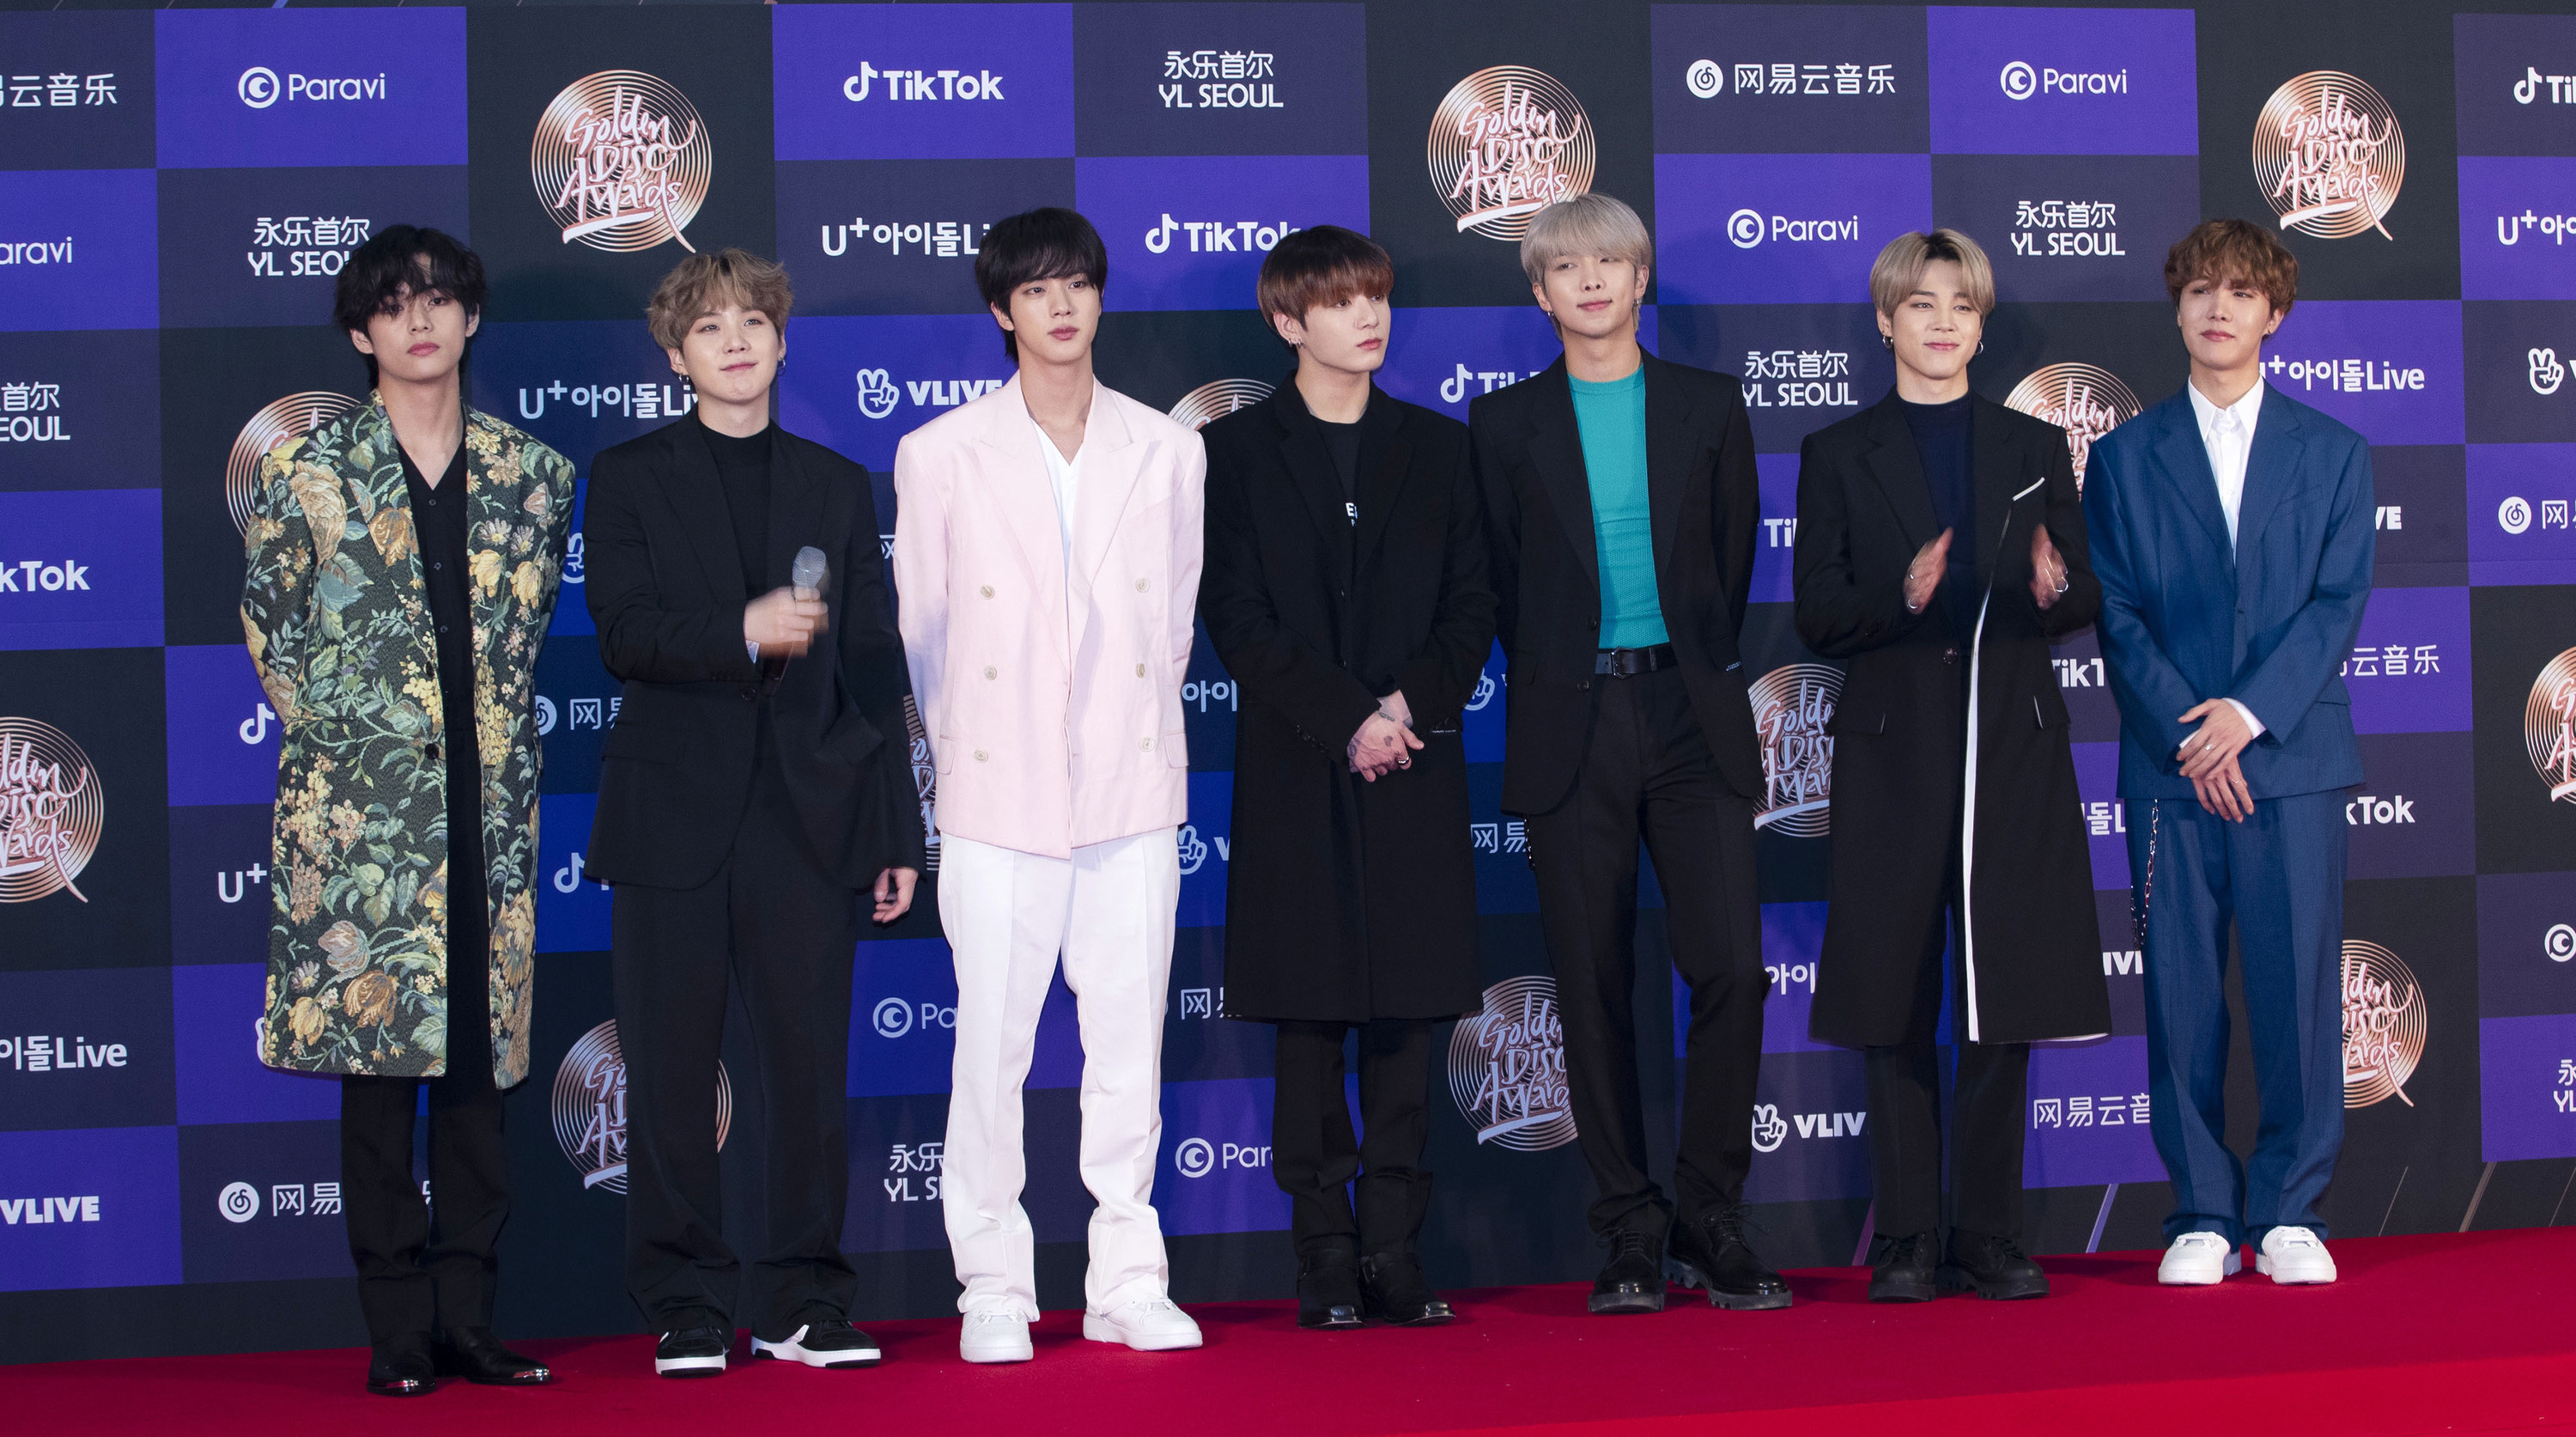 BTS's Outfits At The 2020 Golden Disc Awards: Fashion Details